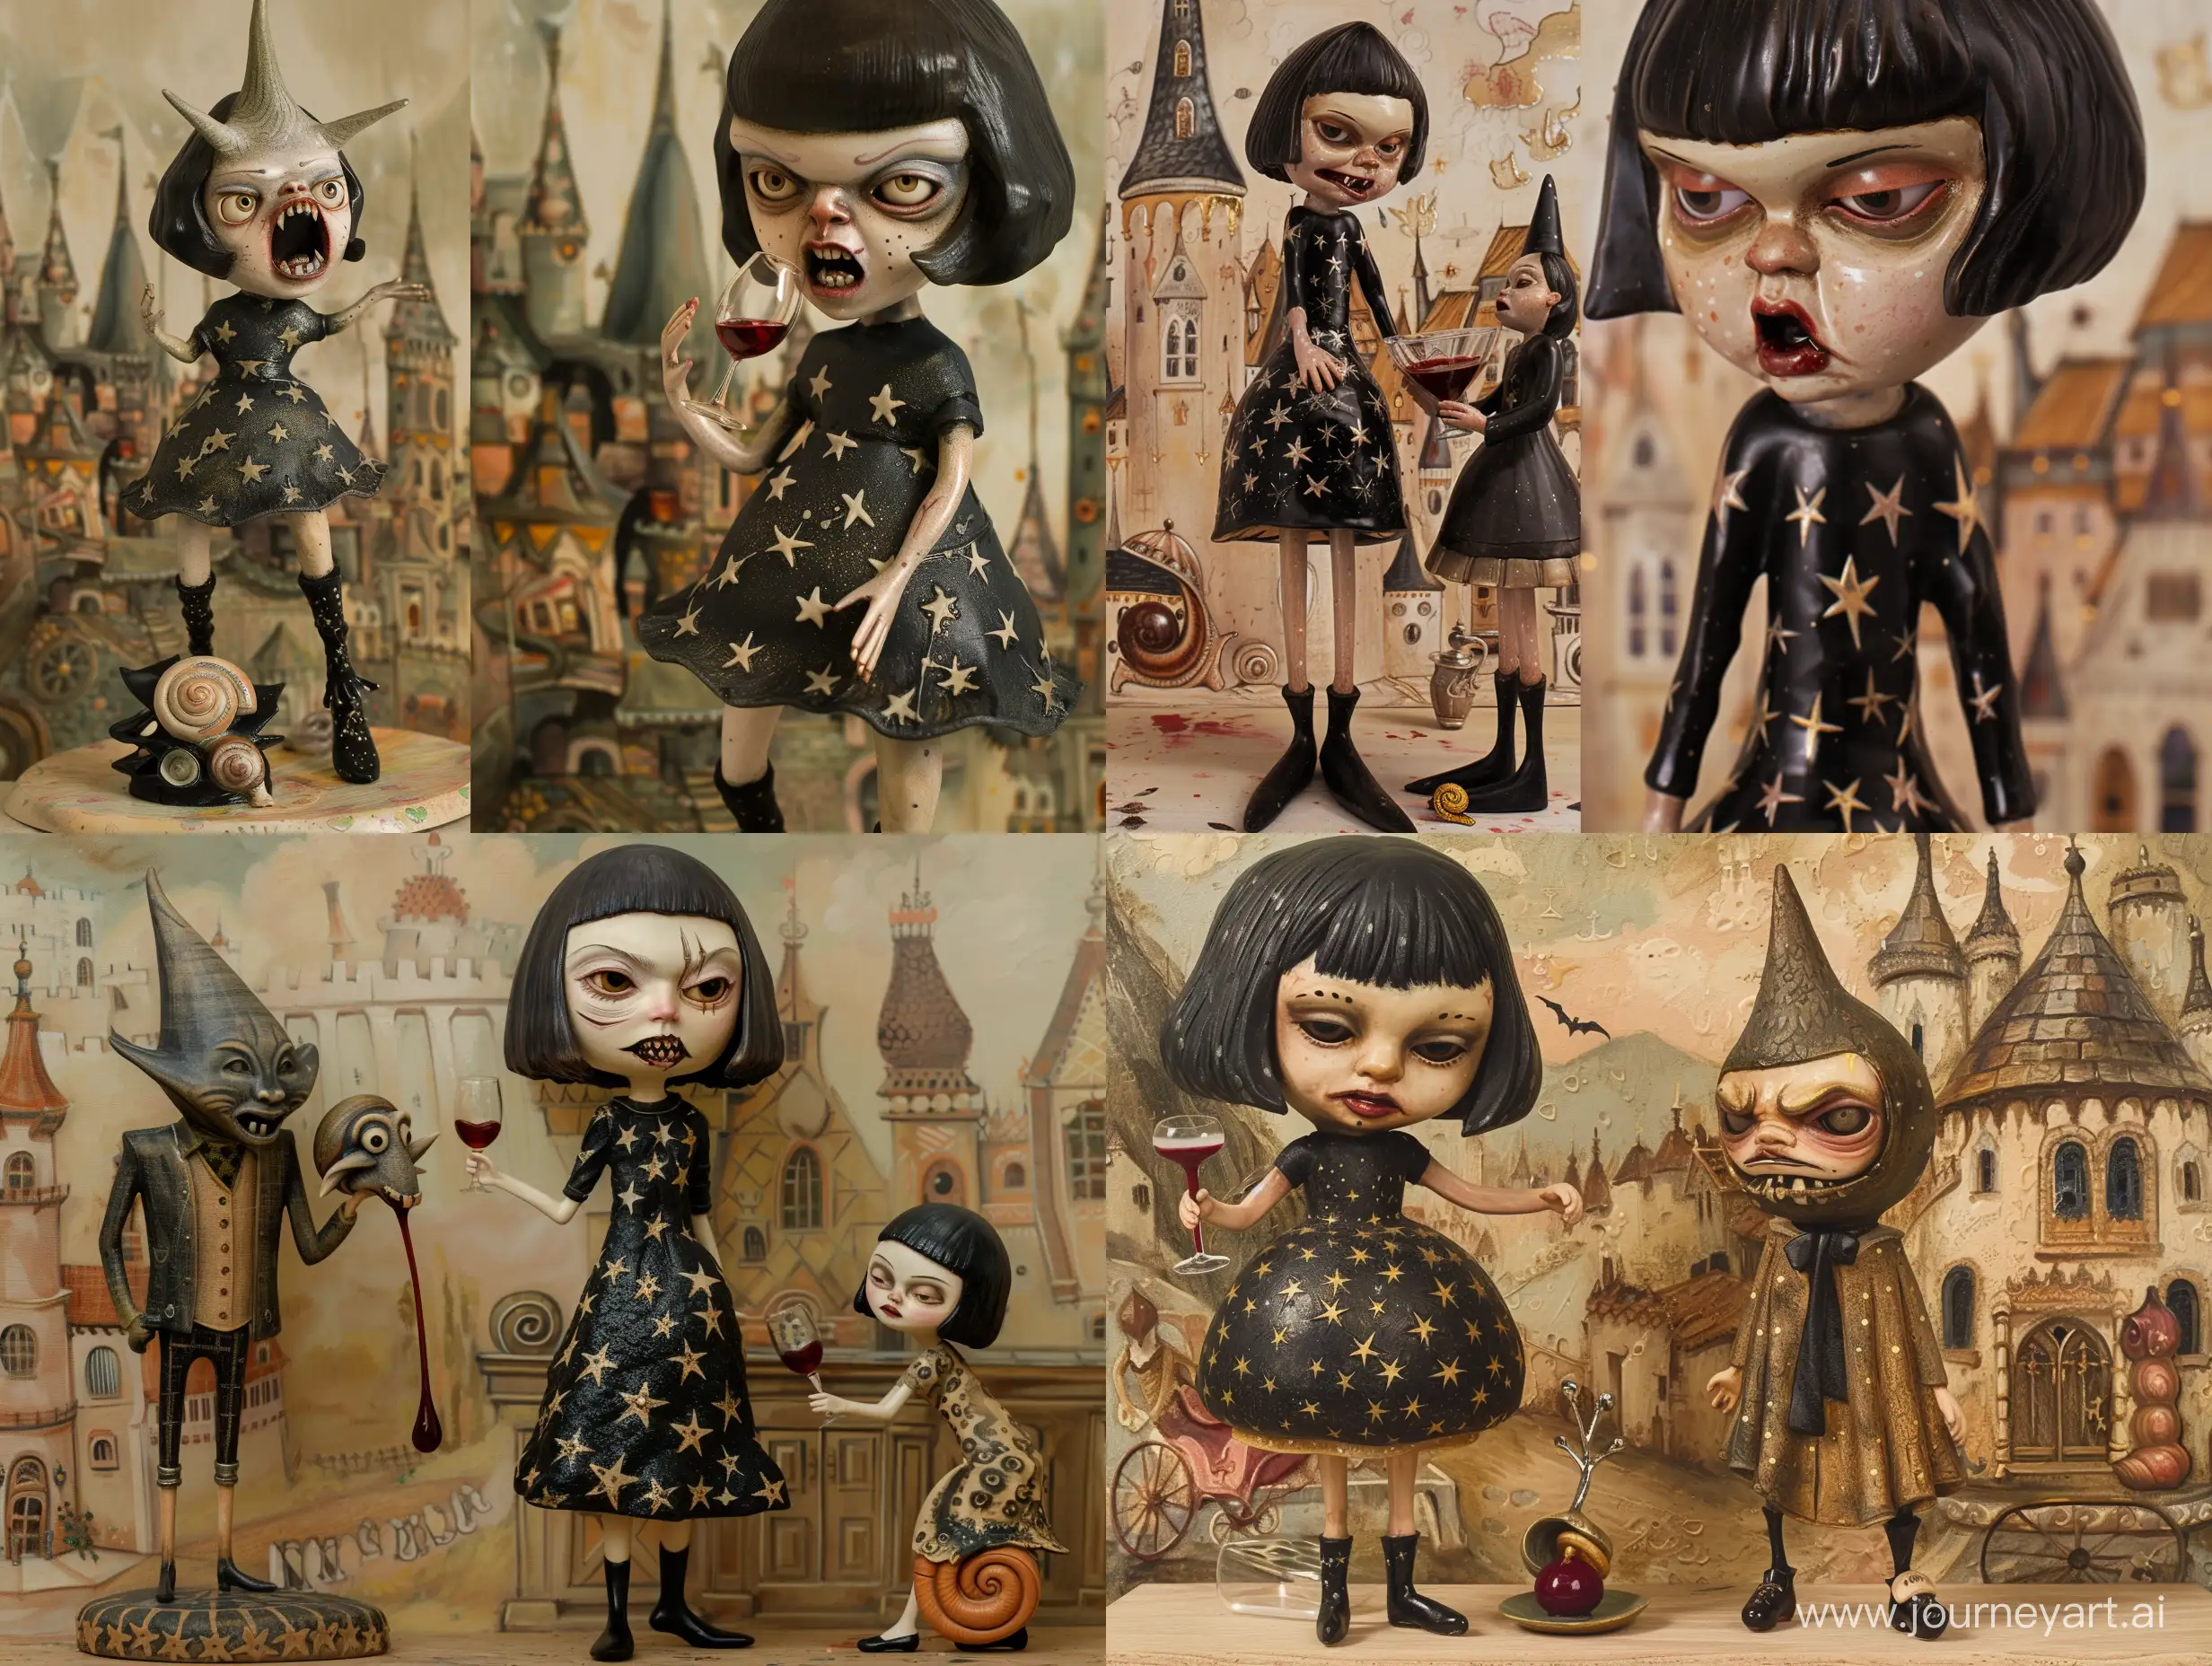 A ceramic art doll in the shape of a fairy tale. In the story, A girl wearing a black dress with a pattern of stars. She wore a bob hairstyle and black leather shoes. The girl and the snail met a vampire in an evening dress with a pointed face and sharp teeth in his mouth. The girl playfully breaks a (((machine that sucks human blood))) in a medieval kitchen where the vampire is the butler of the castle. He was so angry that he raised his buttocks and kept tapping his feet while holding the noble wine glass filled with red liquid in his hand. The vampire looked at it worriedly (((machine that sucks human blood))).The girl shows an expression that hates the world. The background is a medieval design combined with amusement park. The style is inspired by Laurel Burch and Eric Carle. The painting shows multiple views of the scene from different angles. The girl is twelve years old, with a small mouth and deep black eye bags. 8K, real